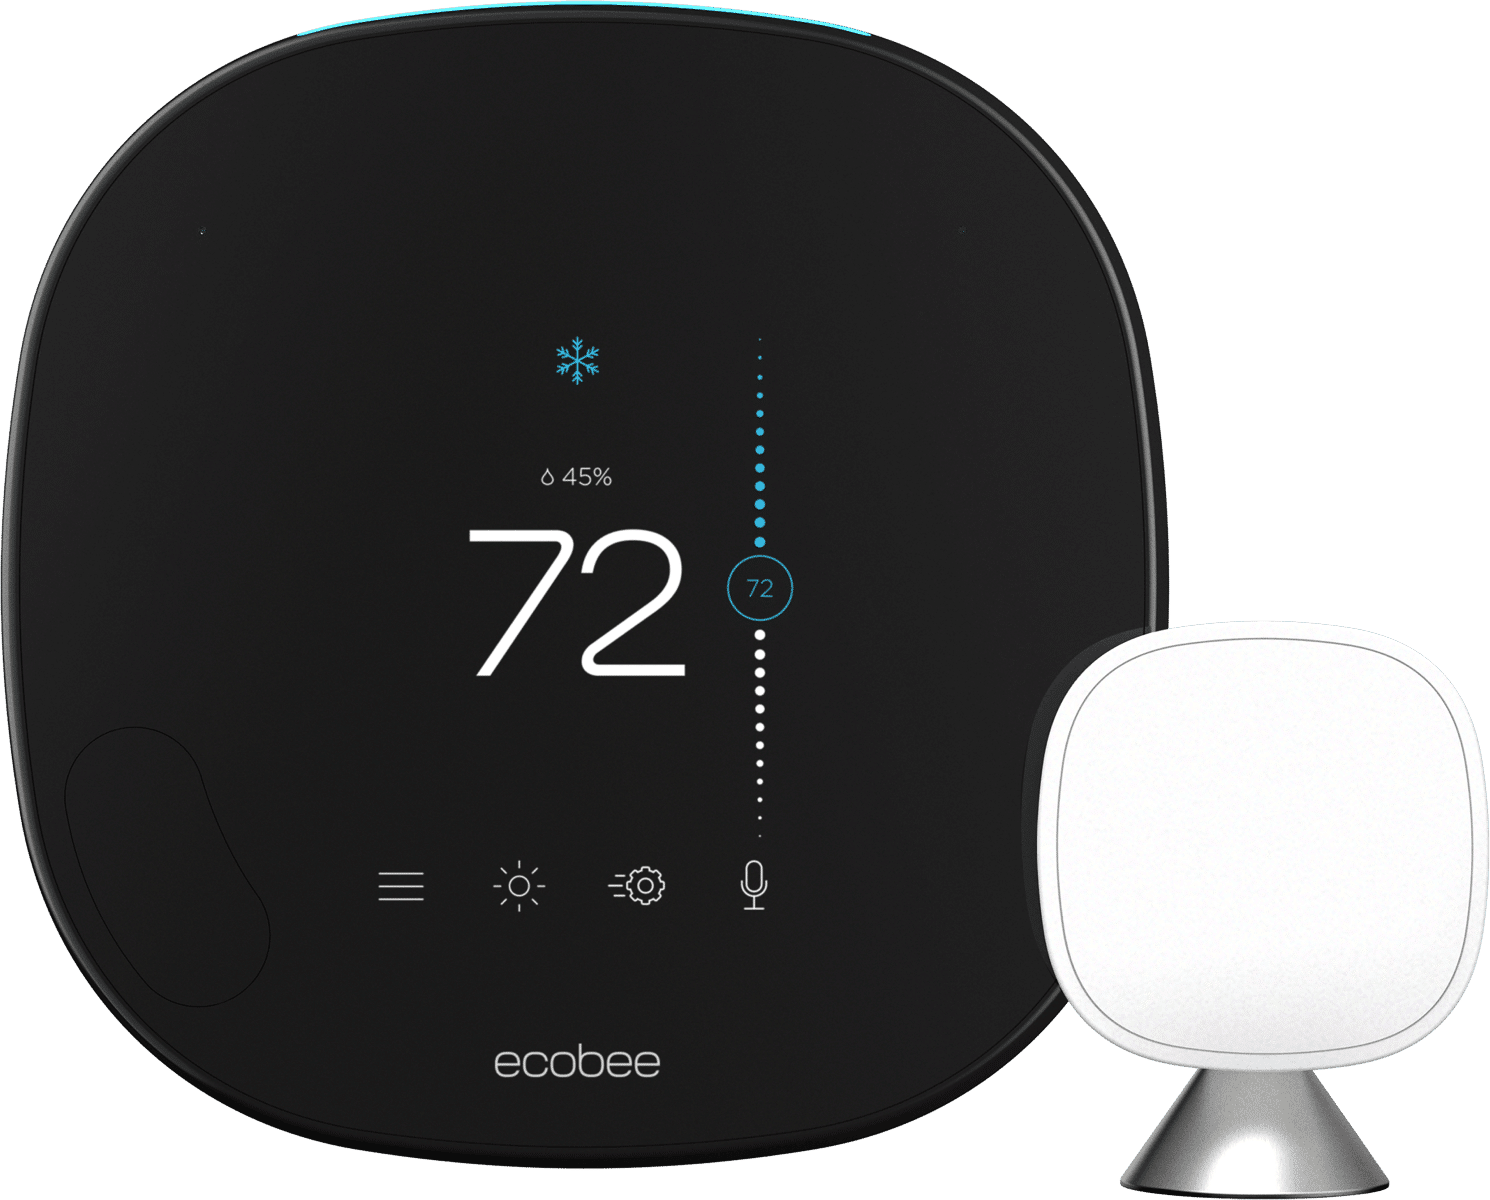 Ecobee smart thermostat and sensor set to 72